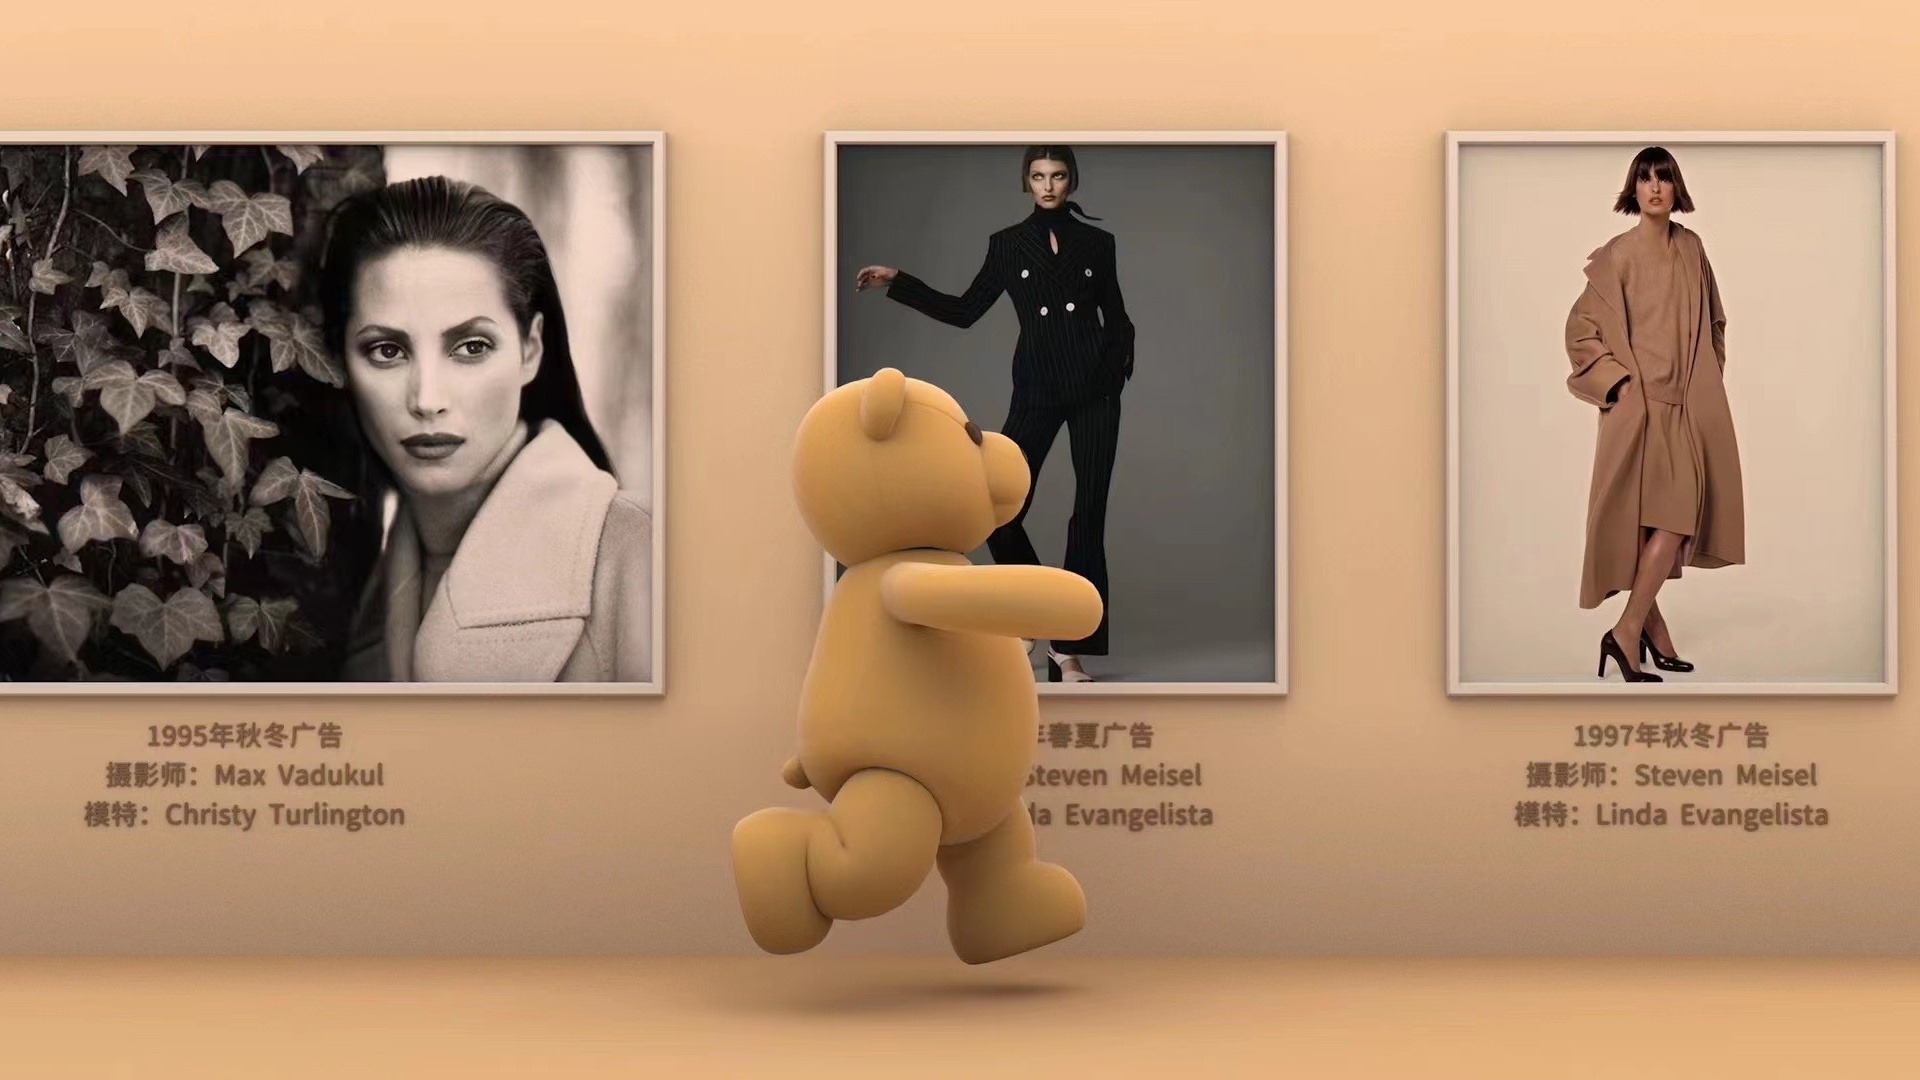 Featuring Max Mara’s iconic Teddy, the house's 70th anniversary campaign has been a smash hit in China via organic social traffic to offline footprints. Photo: Snapshot of Max Mara's Mini Program